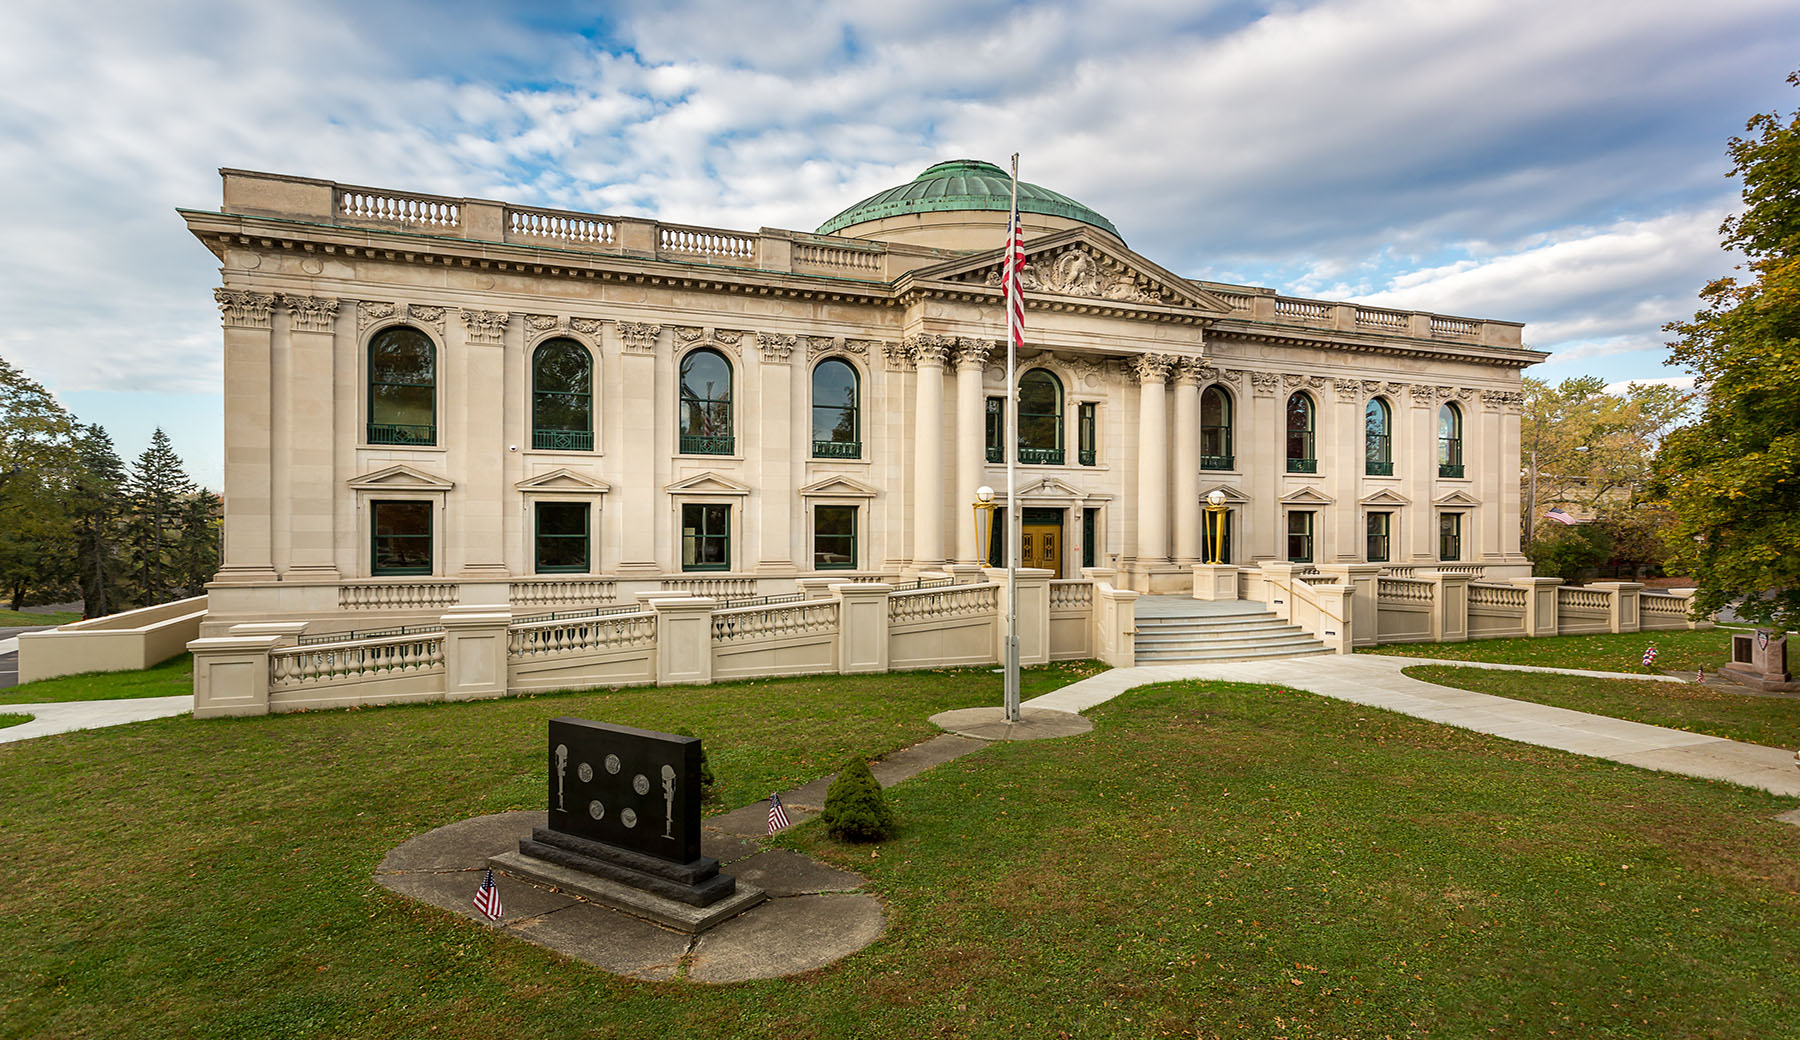 Lothrop Associates expanded the historic Hudson County Courthouse, designed by Warren and Wetmore, and made the 1906 building accessible. The façade was restored with ramps and entrance landing added.